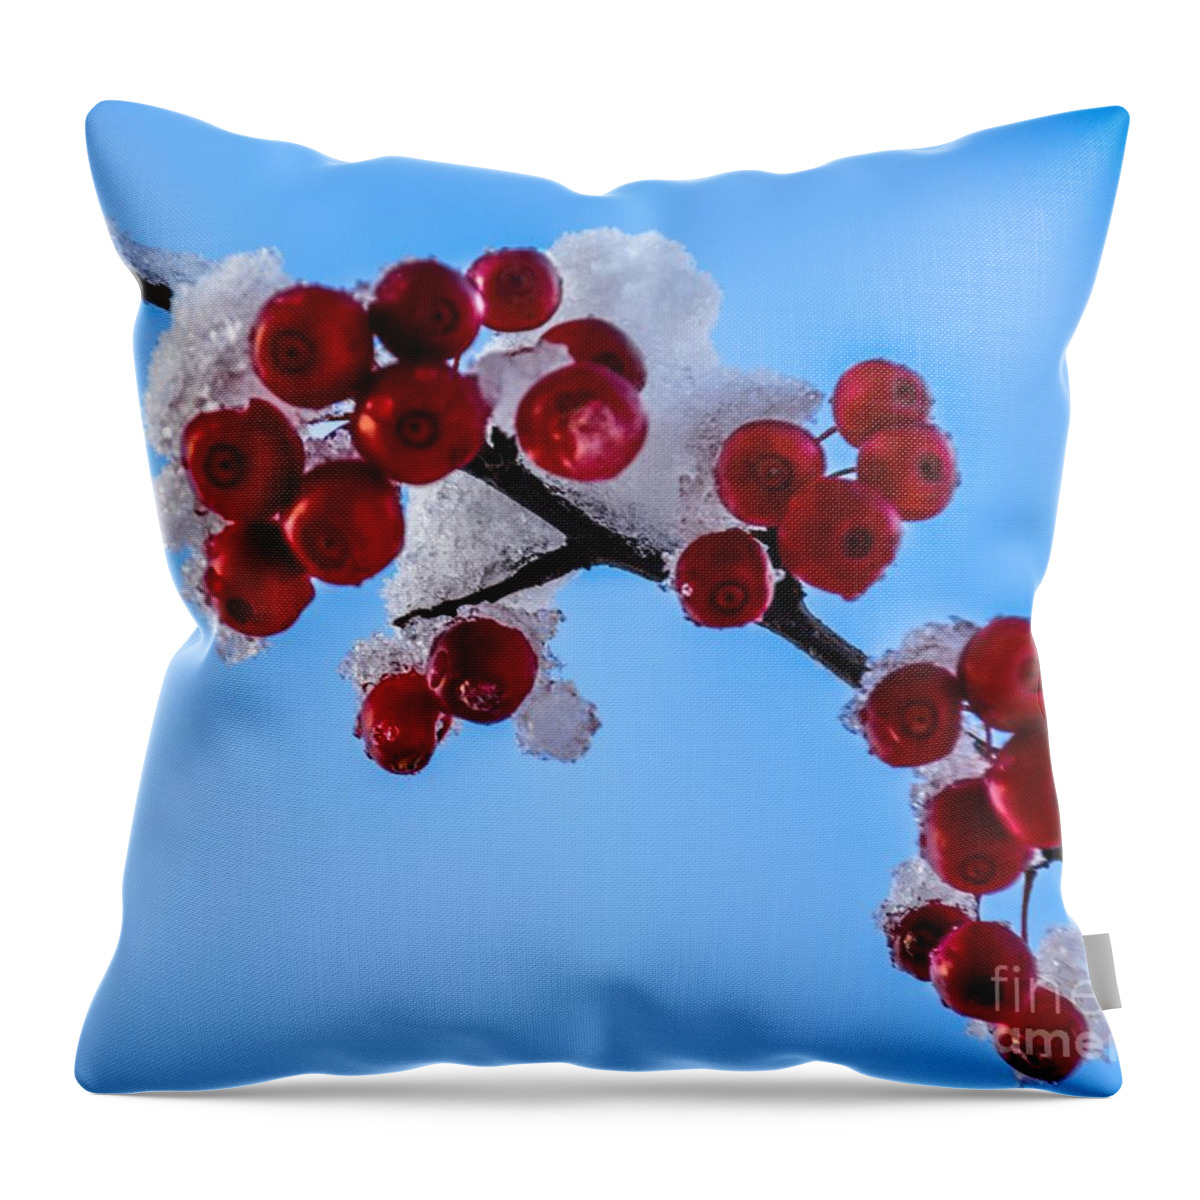 Crabapples Throw Pillow featuring the photograph Crabtree Ornaments by Randy J Heath